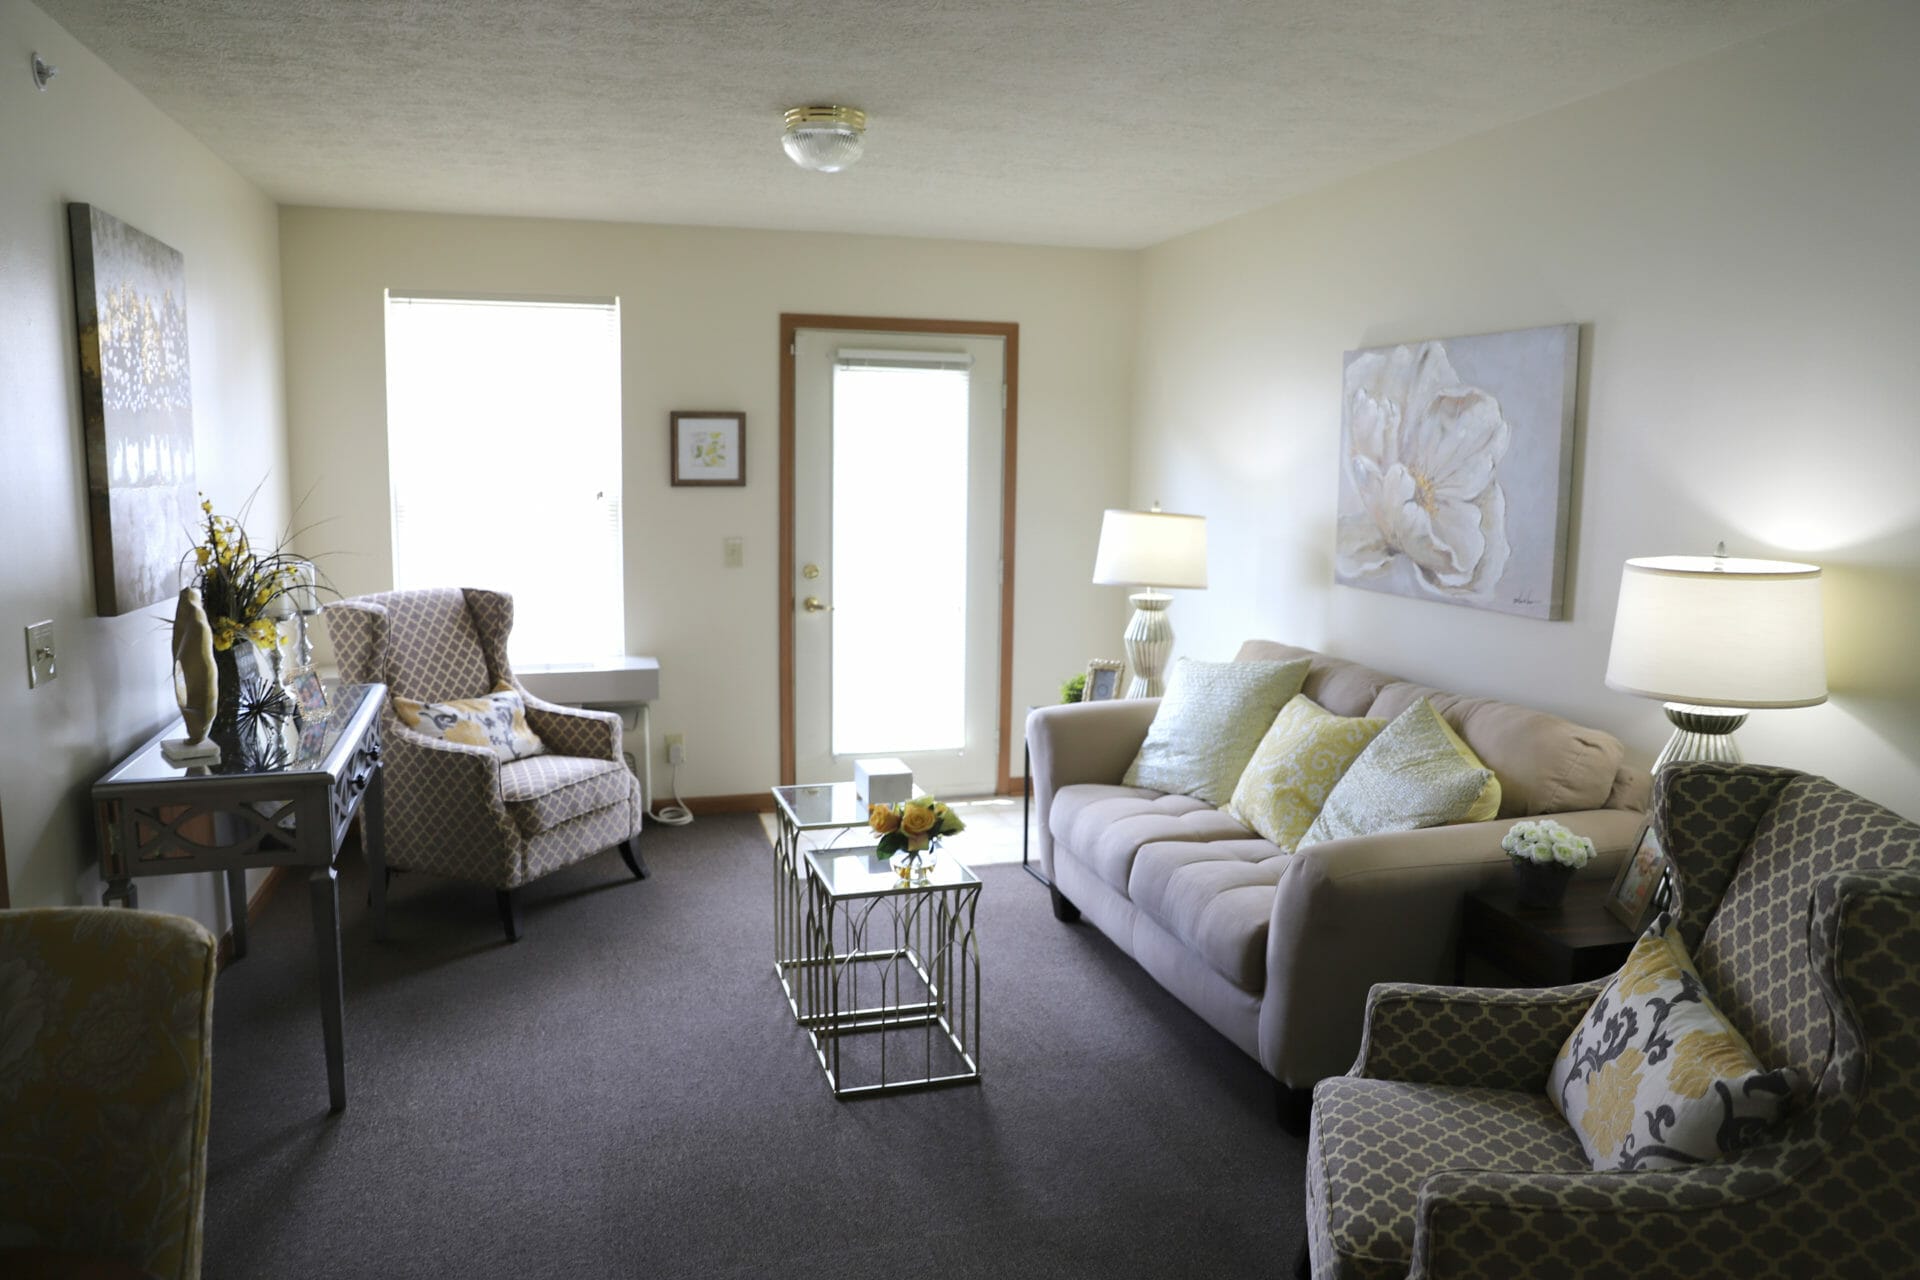 <span  class="uc_style_uc_tiles_grid_image_elementor_uc_items_attribute_title" style="color:#000000;">Living room in an apartment at Meadow Lakes Assisted Living Apartments. </span>